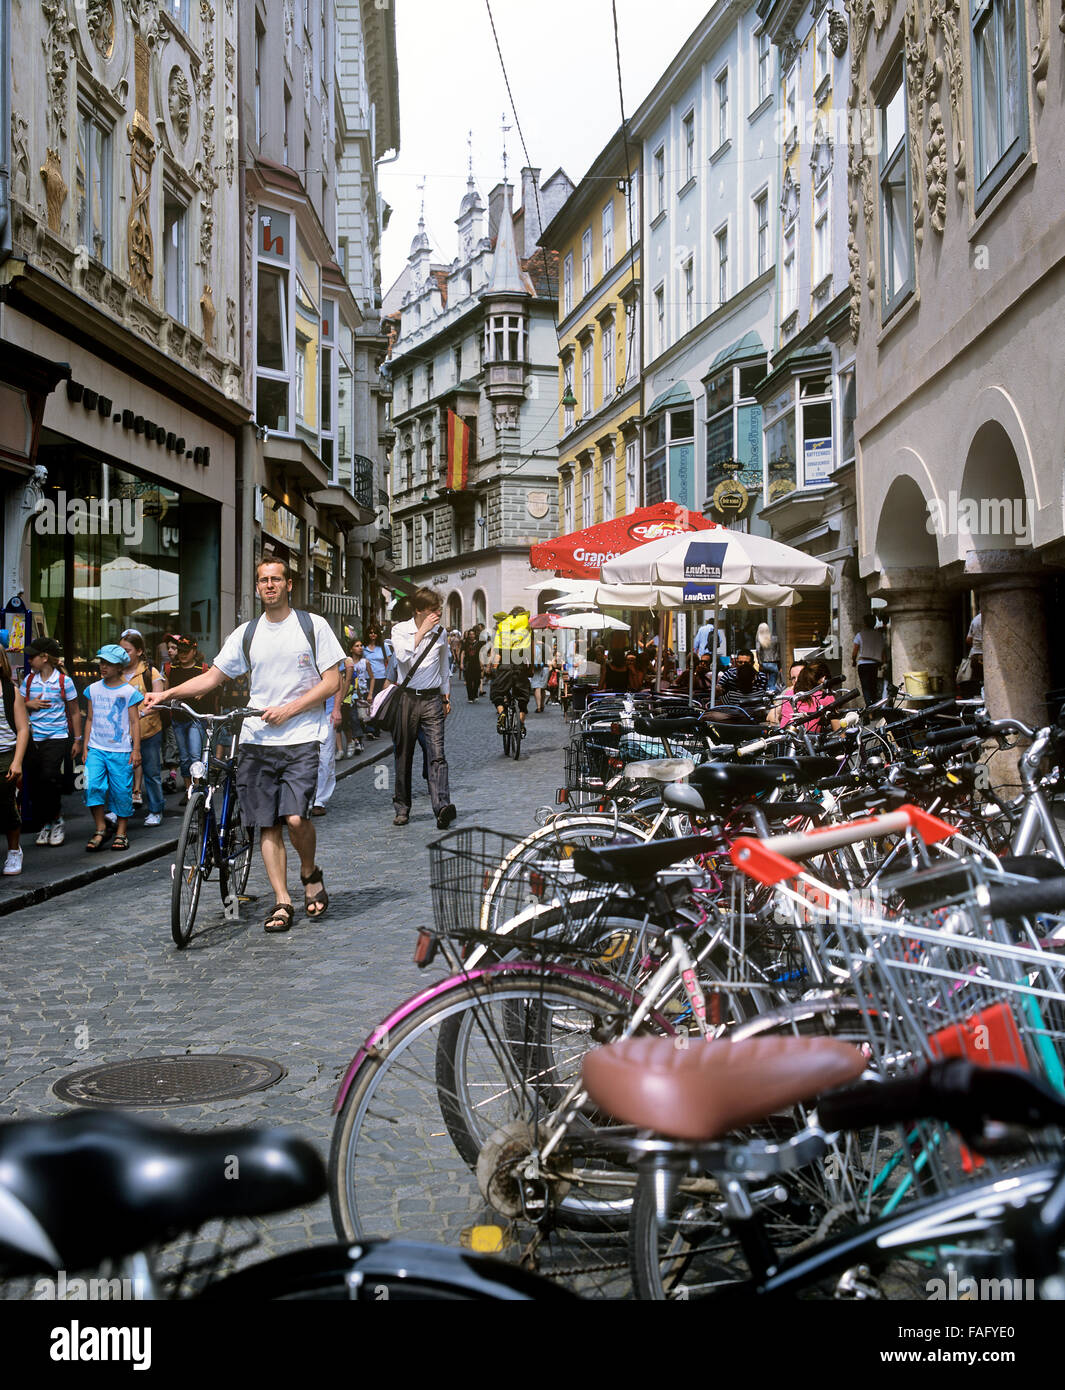 Bicycles parked in a car-free historic street, Sporgasse, Graz, Austria Stock Photo